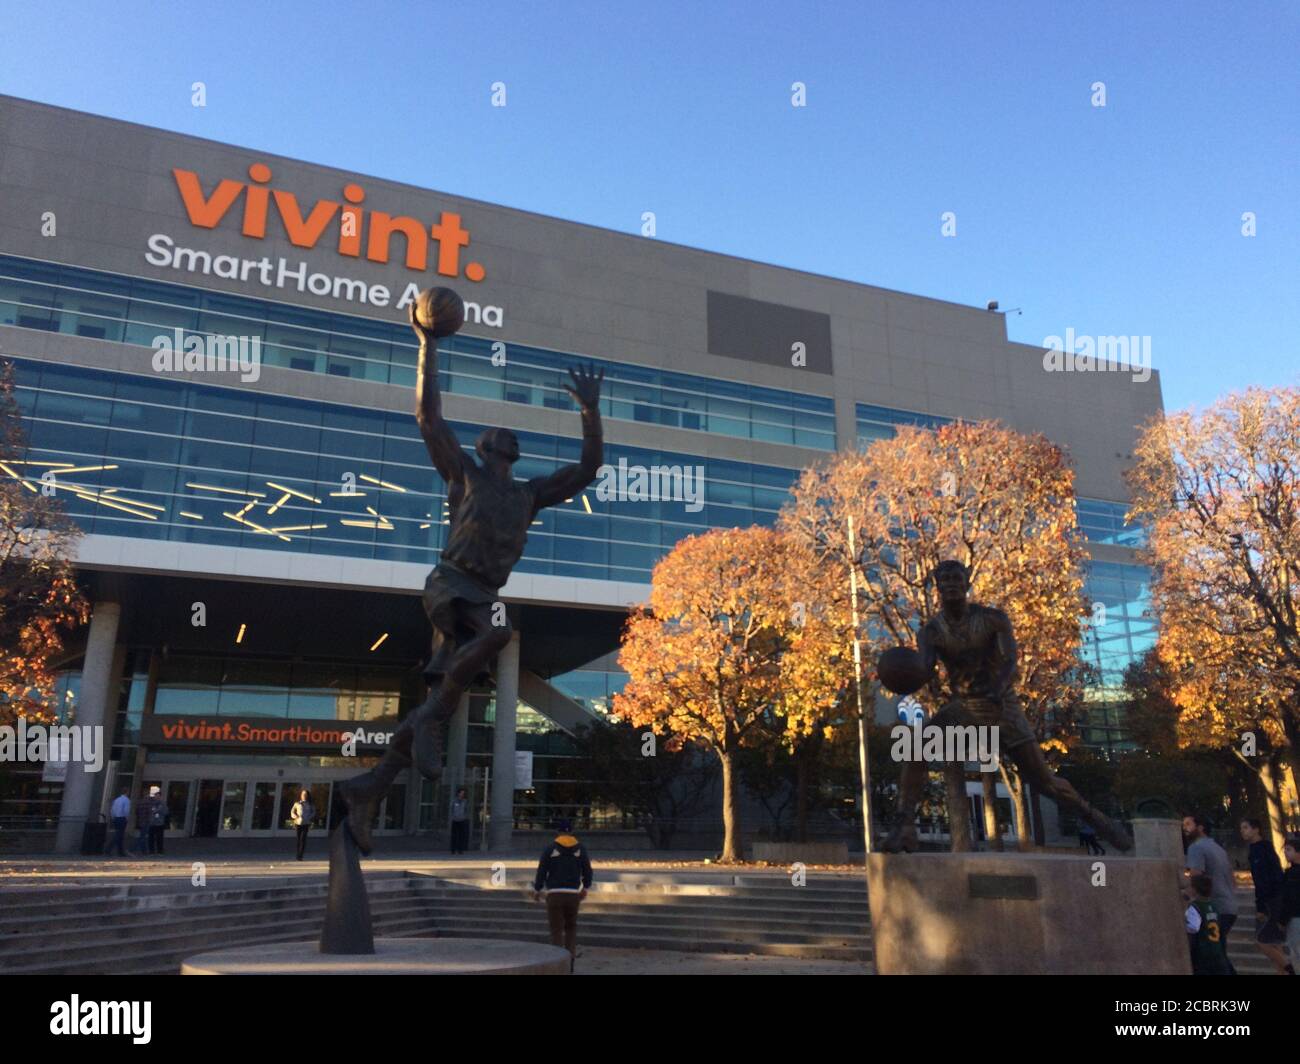 Vivint Smart Home Arena. NBA basketball team Utah Jazz play home games in this arena.  Club legends Karl Malone and John Stockton statues. Stock Photo